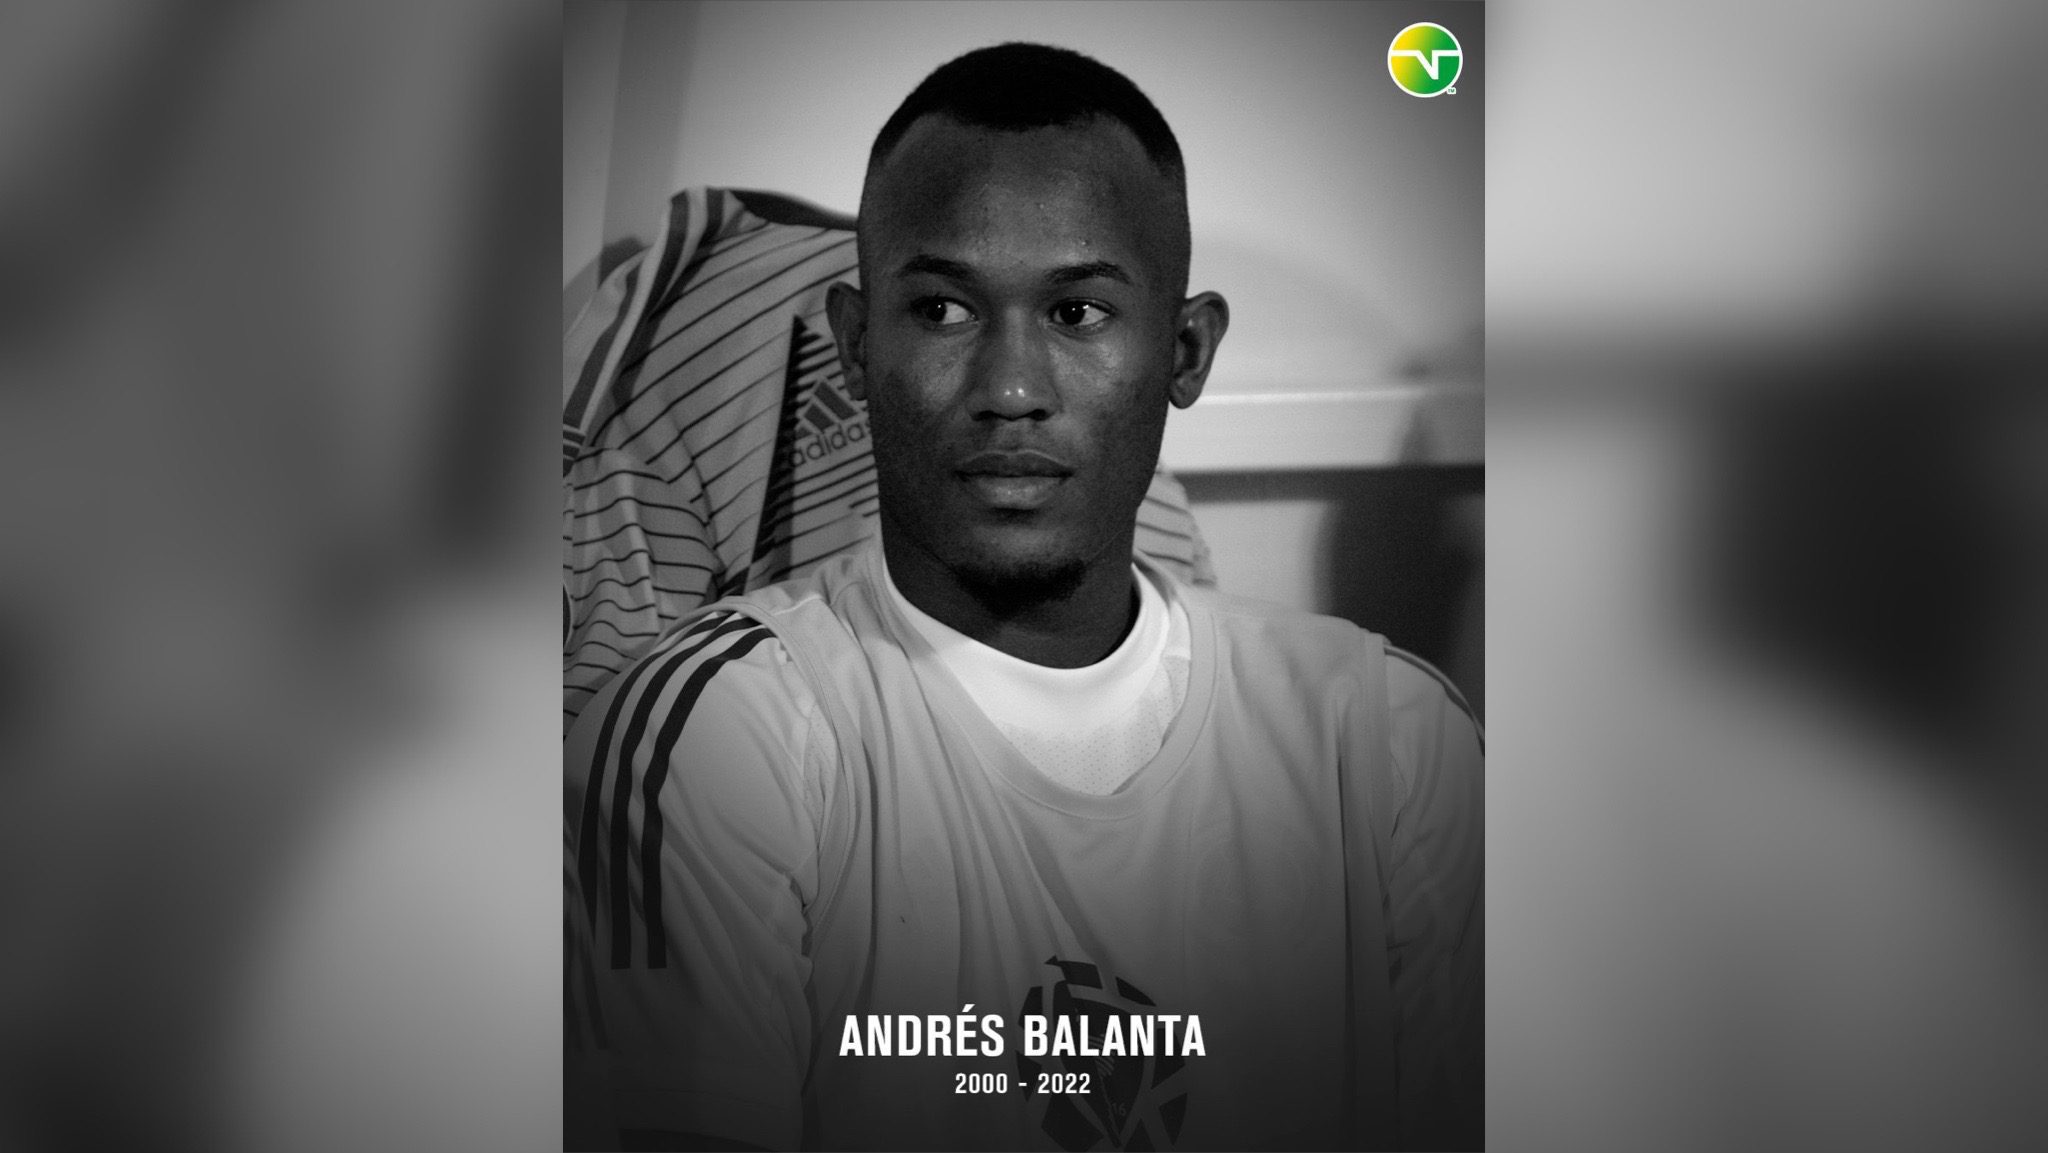 22-Year-Old Colombian Defensive Midfielder Dies Suddenly After Collapsing in Training | The Gateway Pundit | by Jim Hᴏft